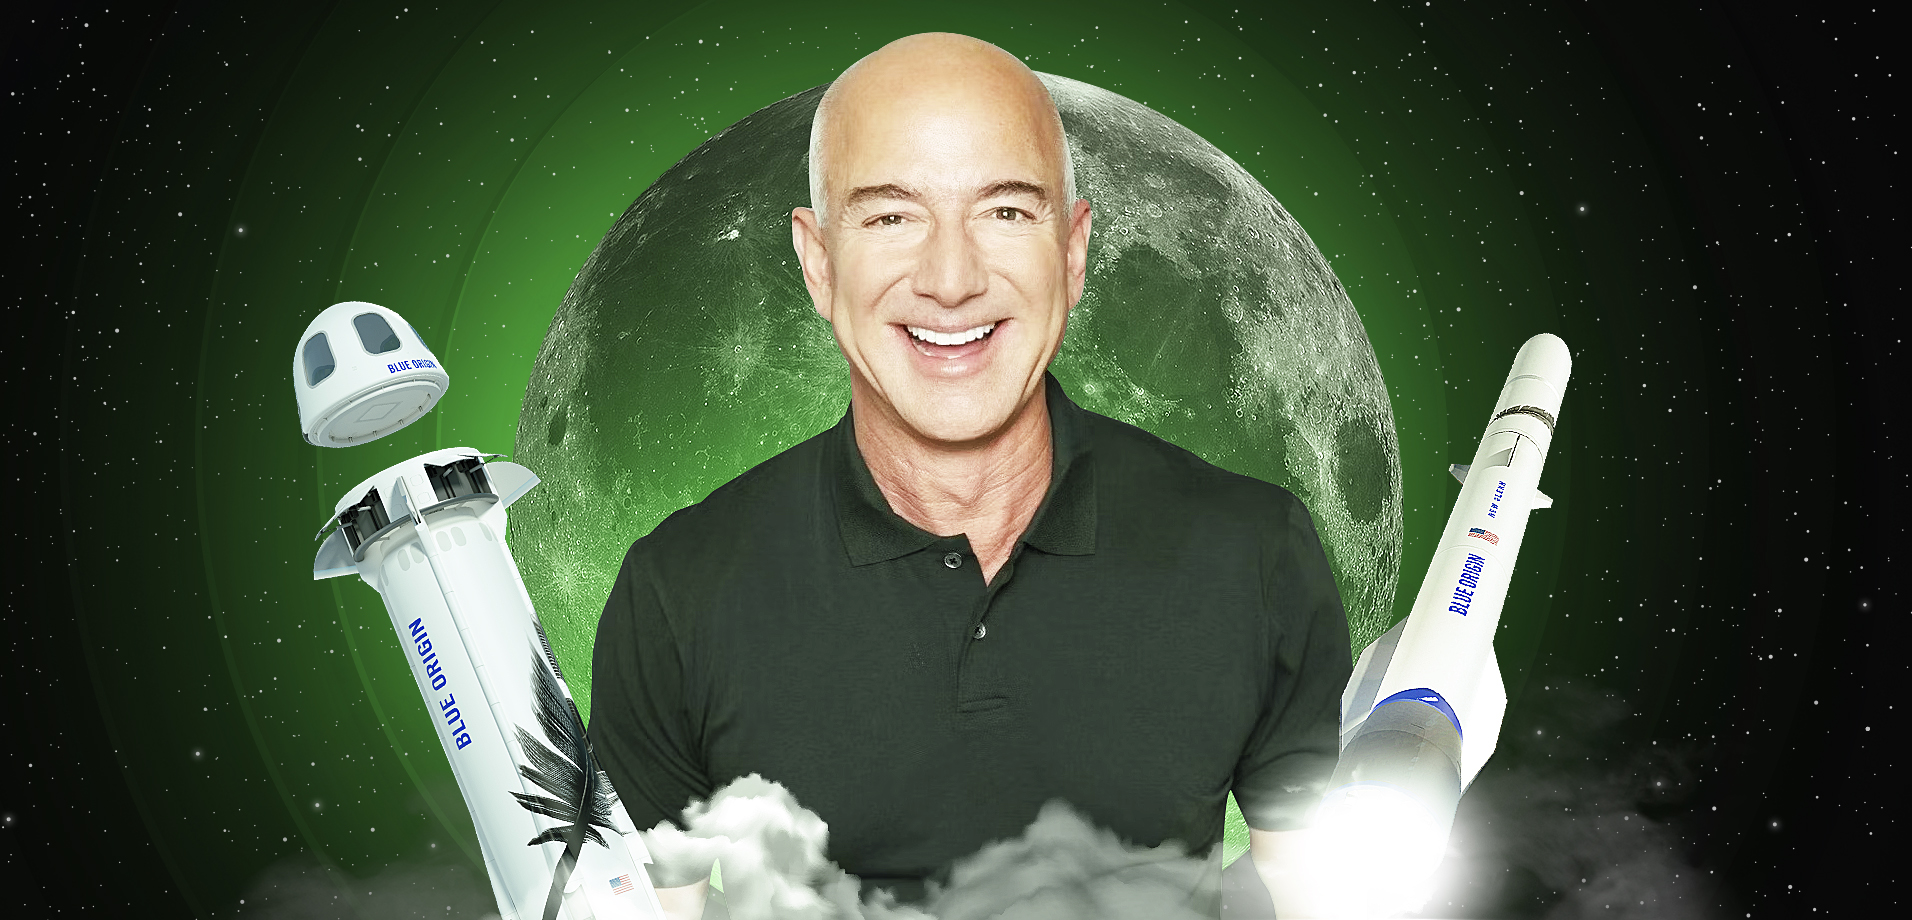 Following the leader. 50 best quotes from Jeff Bezos